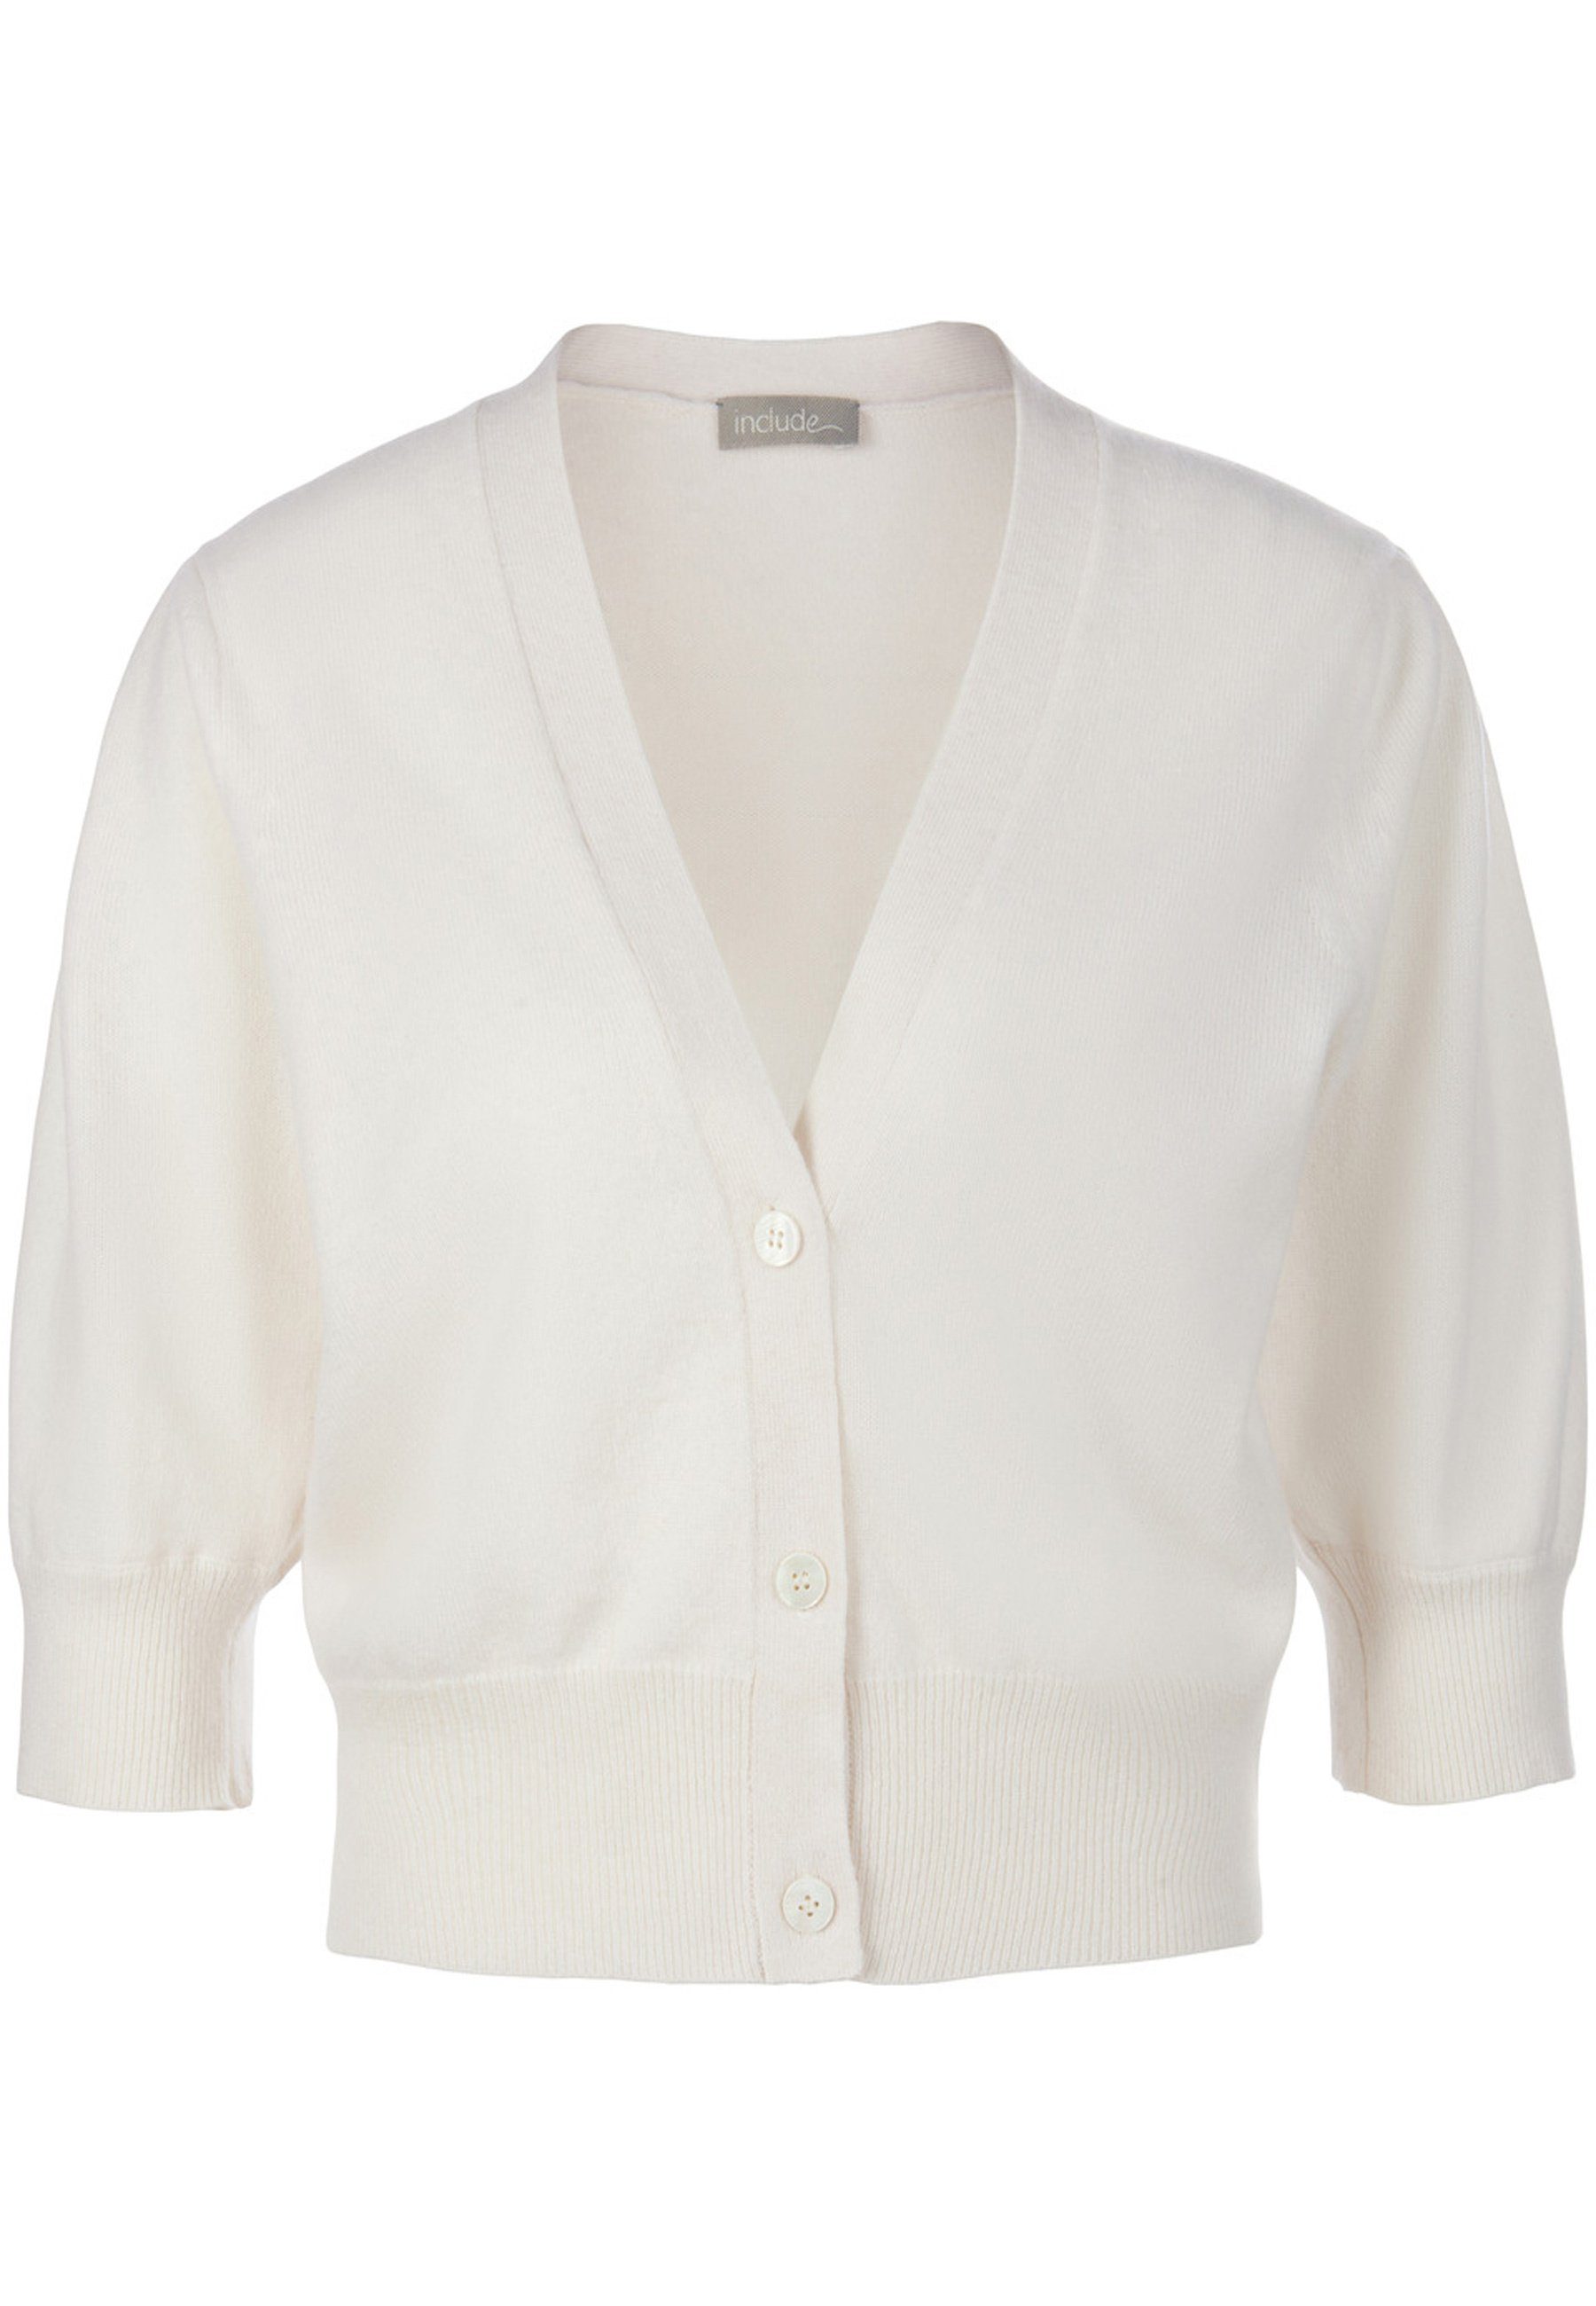 wollweiss Cashmere Cardigan include